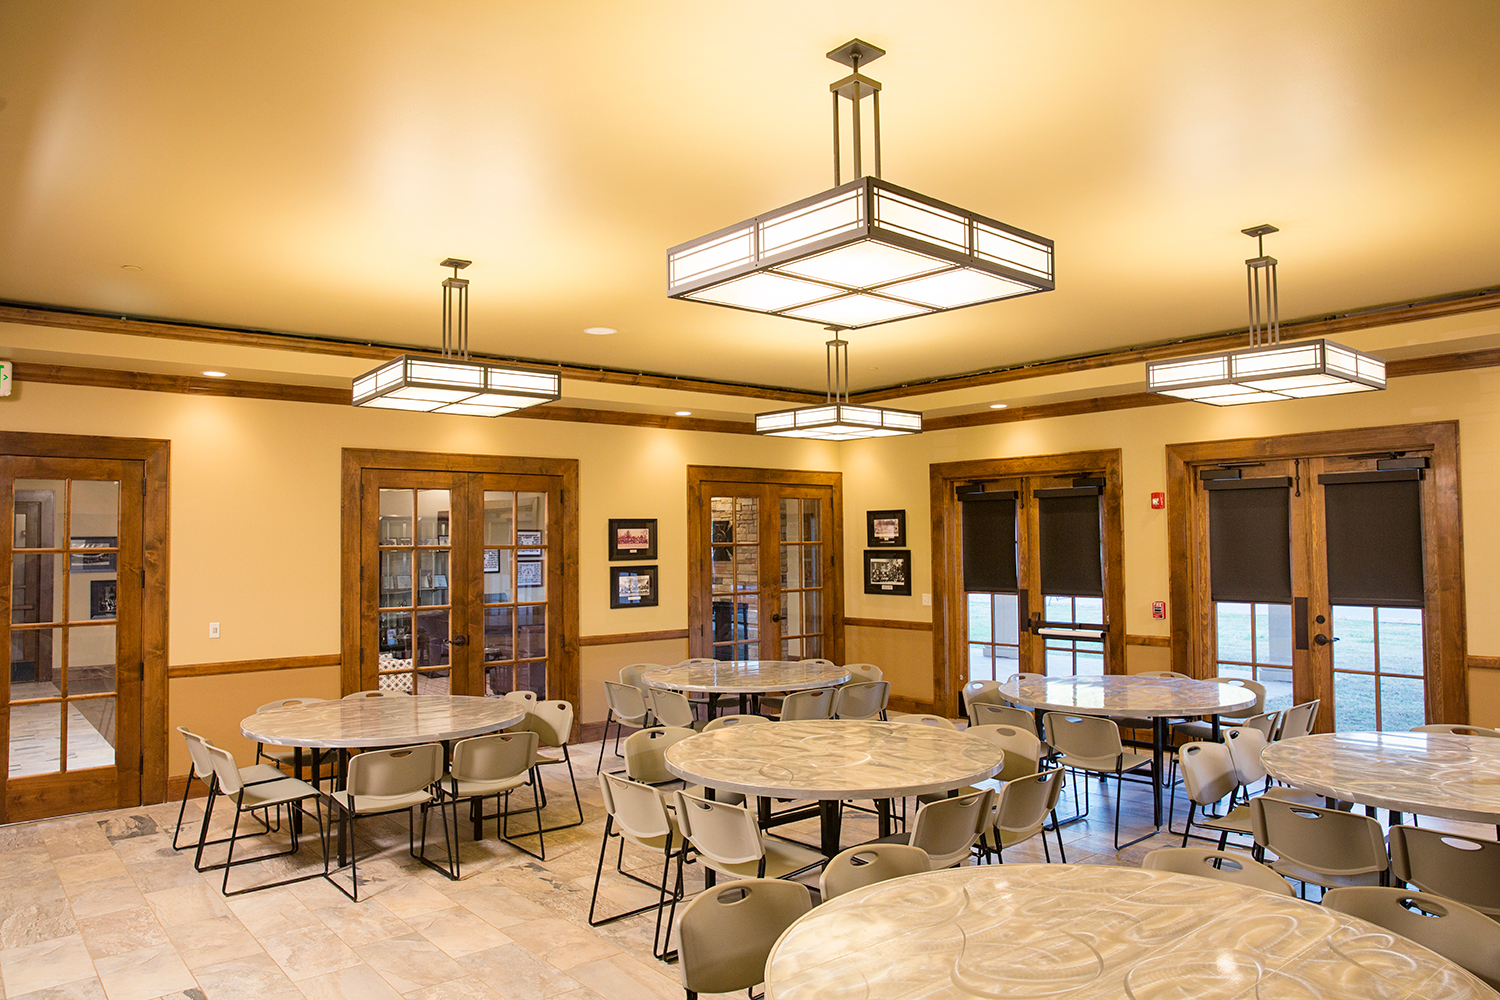 Midland Crafts pendants enhance educational interior design in a residence hall dining room.